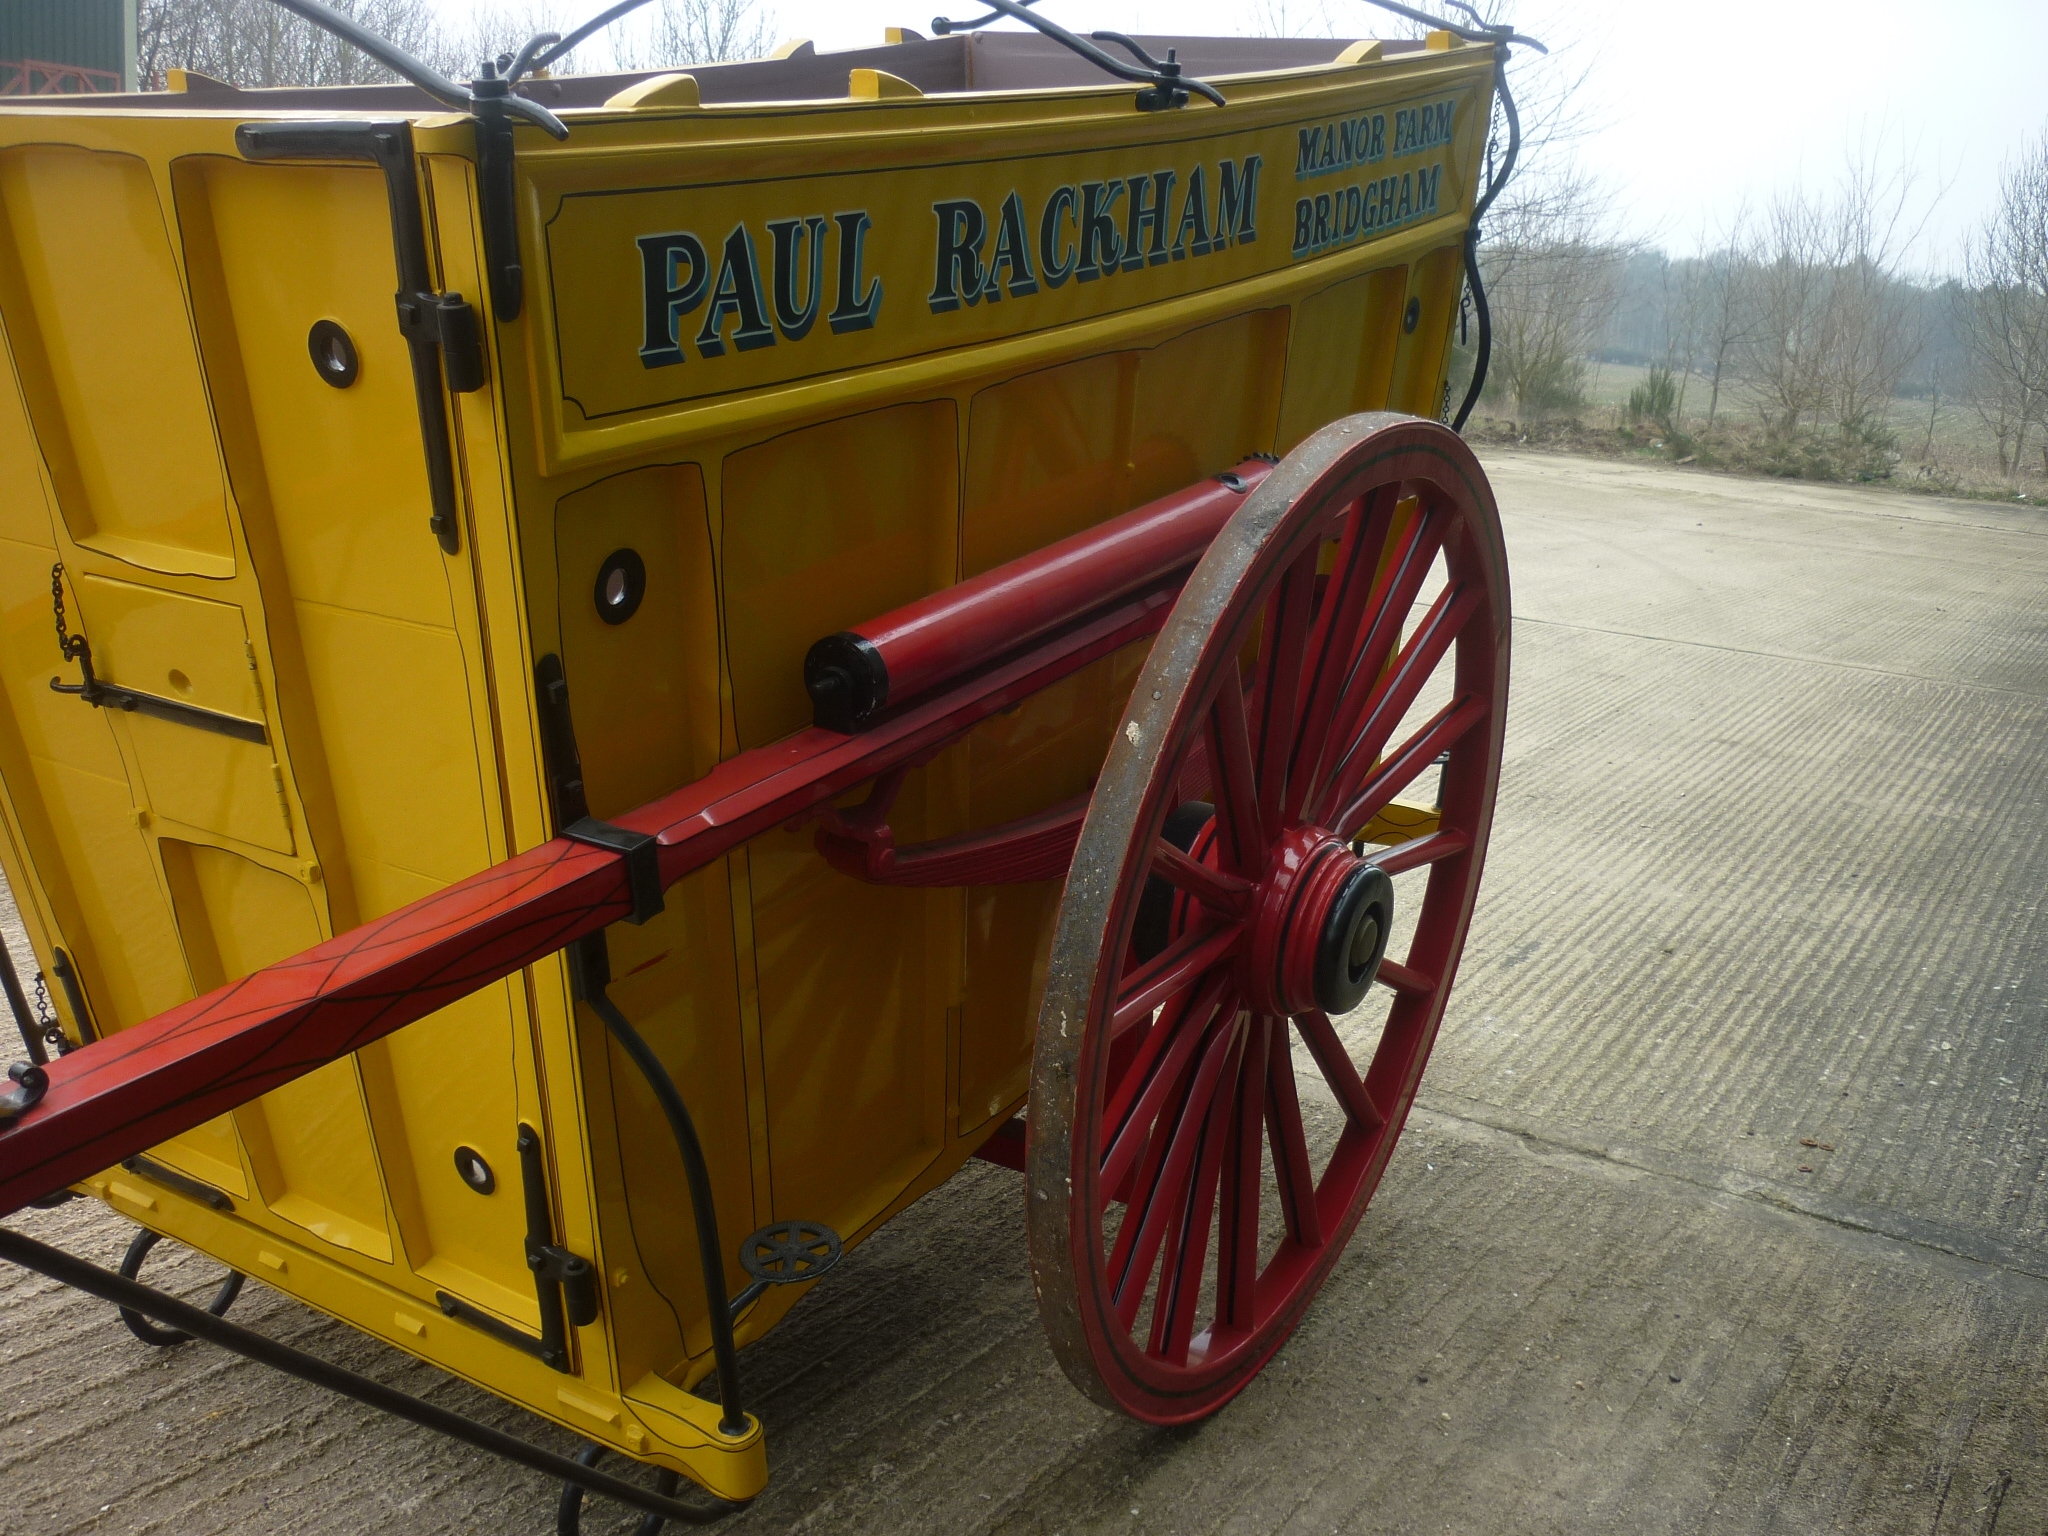 HORSE AMBULANCE or KNACKER'S CART originally used at Epsom Racecourse from 1895 to 1905 for - Image 3 of 6